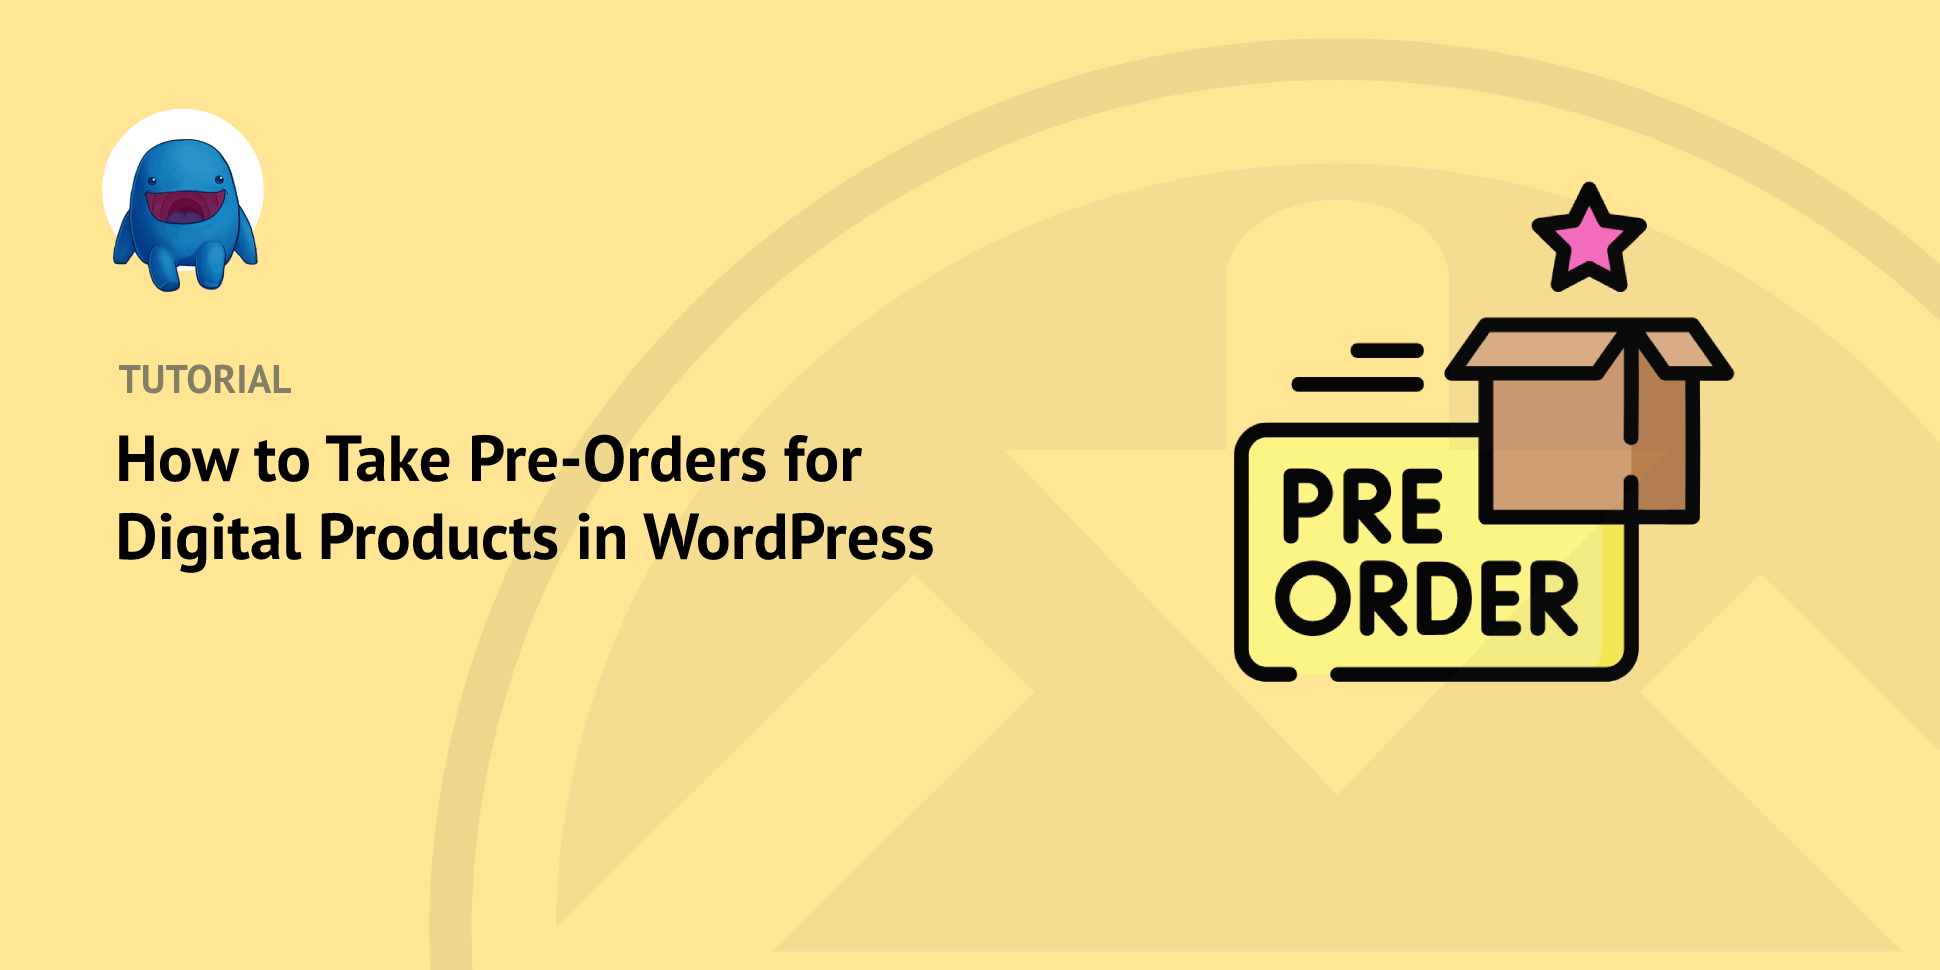 How to Take Pre-Orders for Digital Products in WordPress